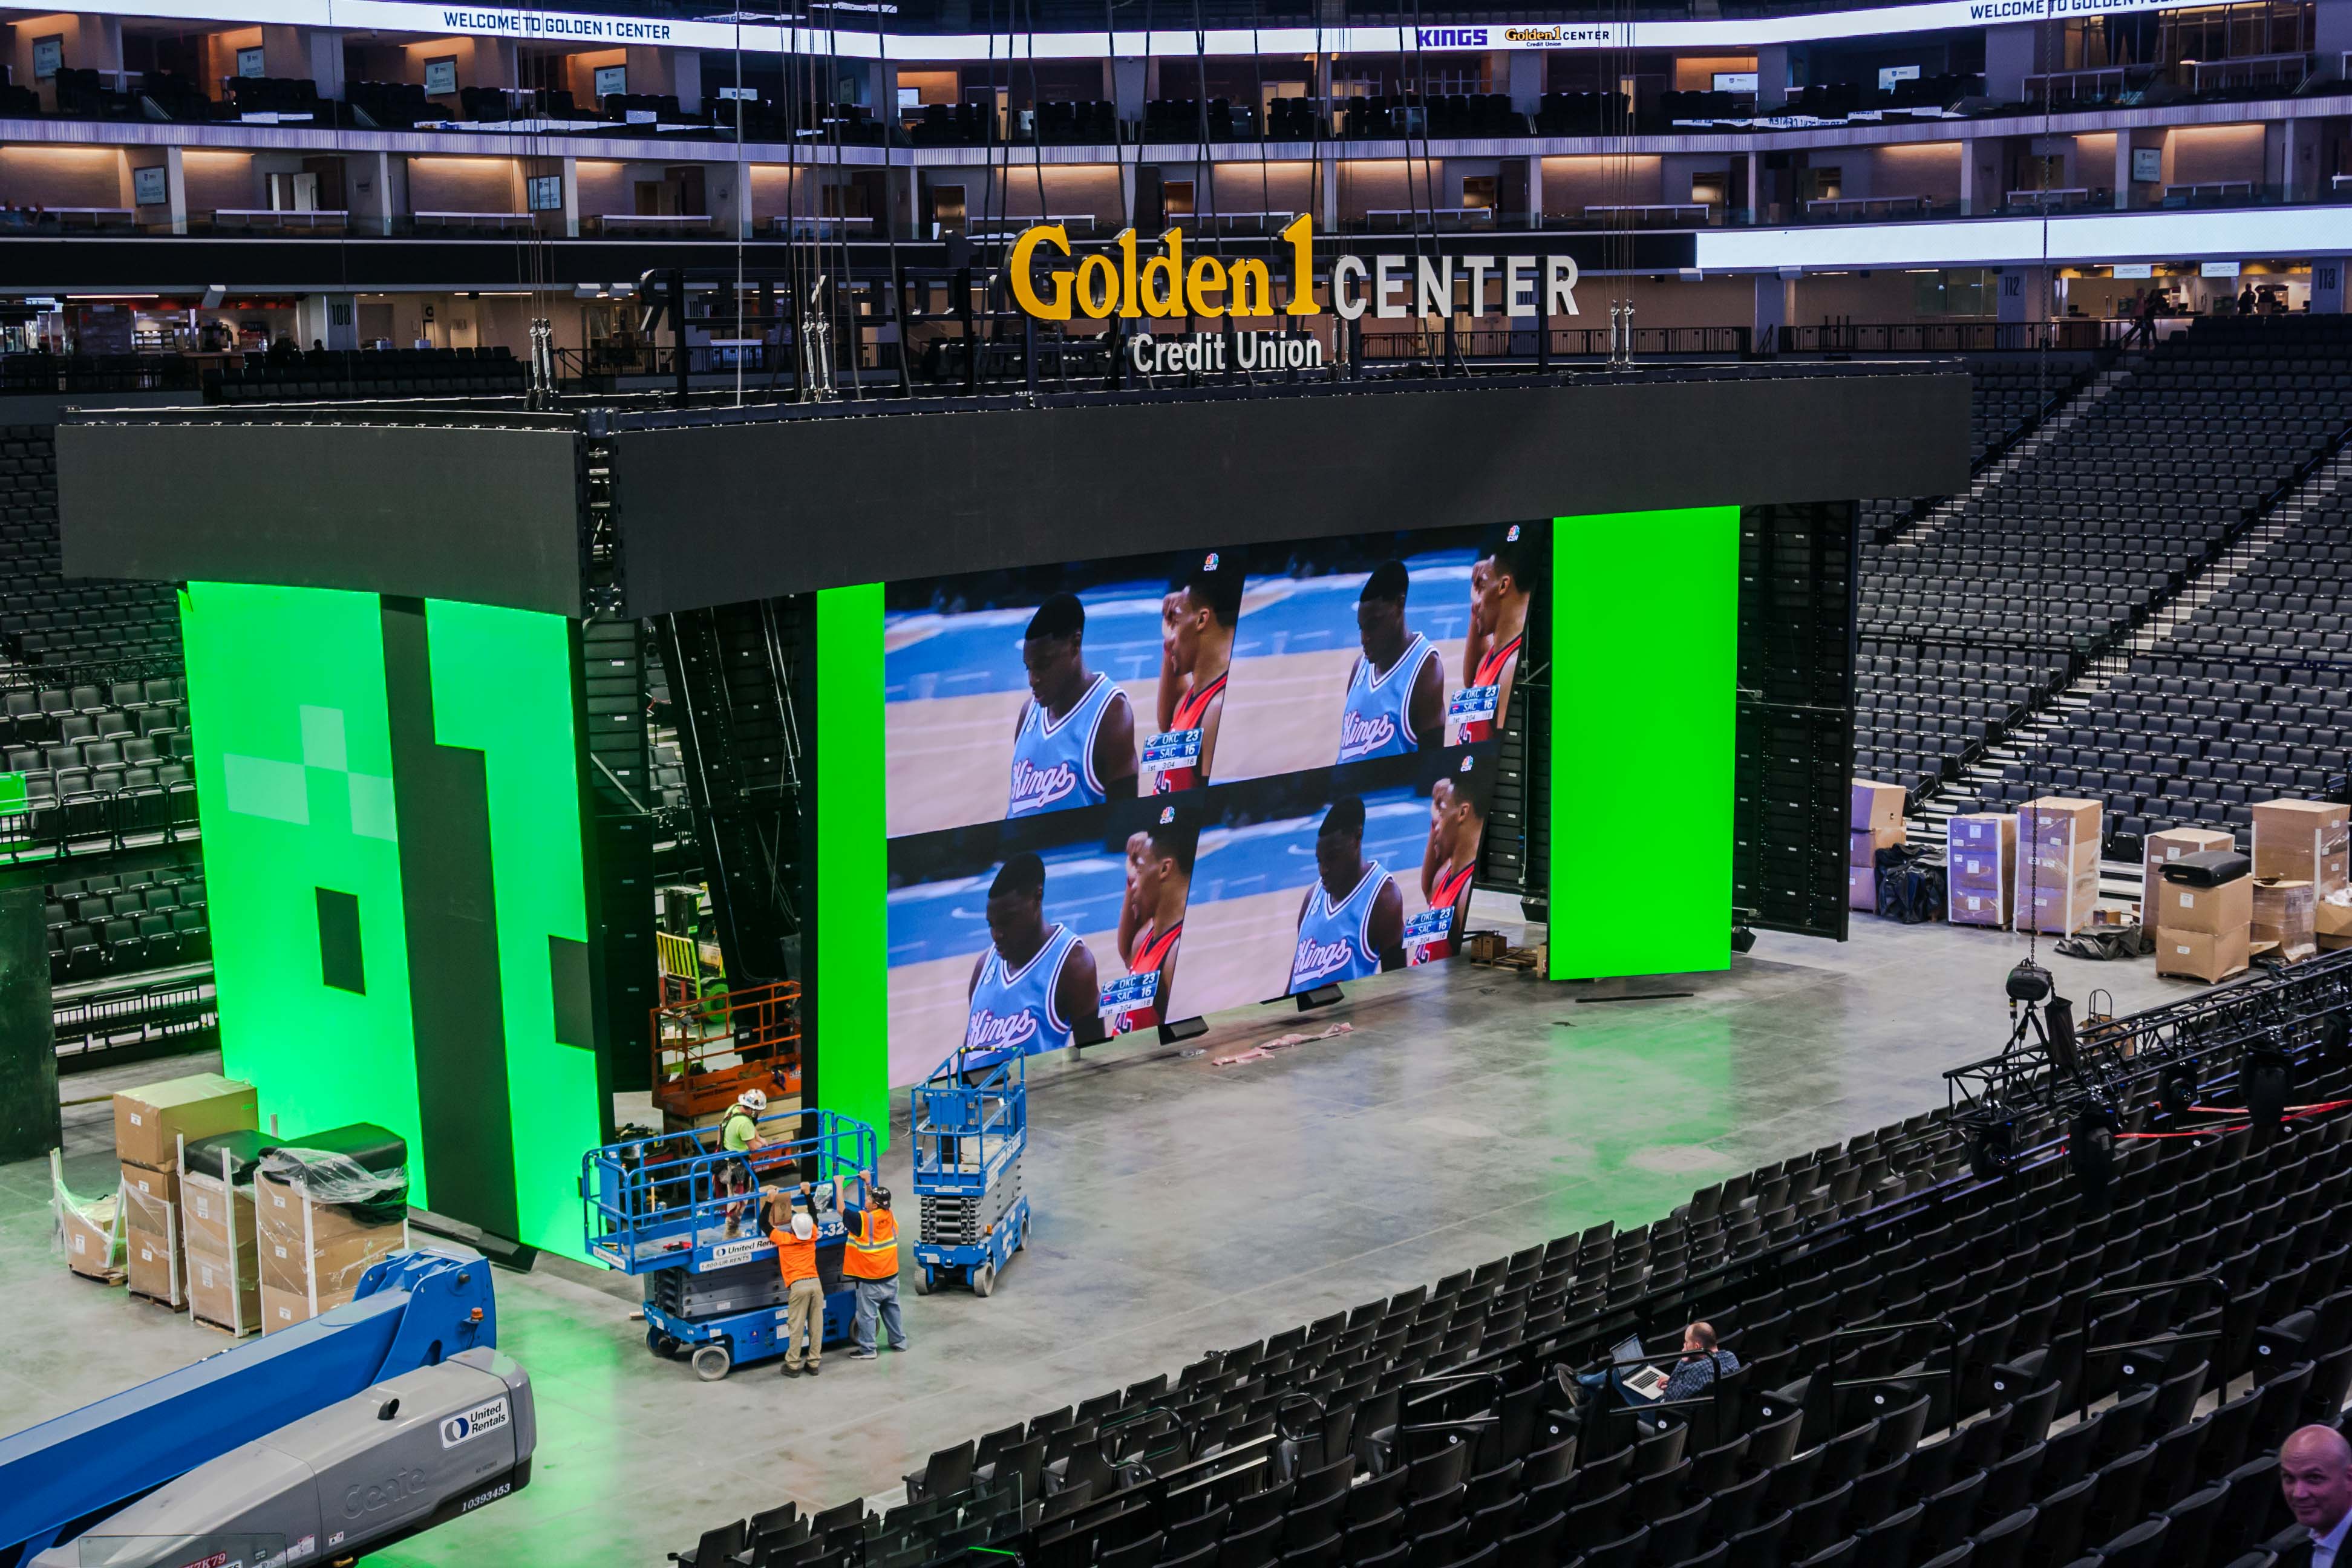 The Sacramento Kings have installed a 4K scoreboard in its new arena, The Golden 1 Center,